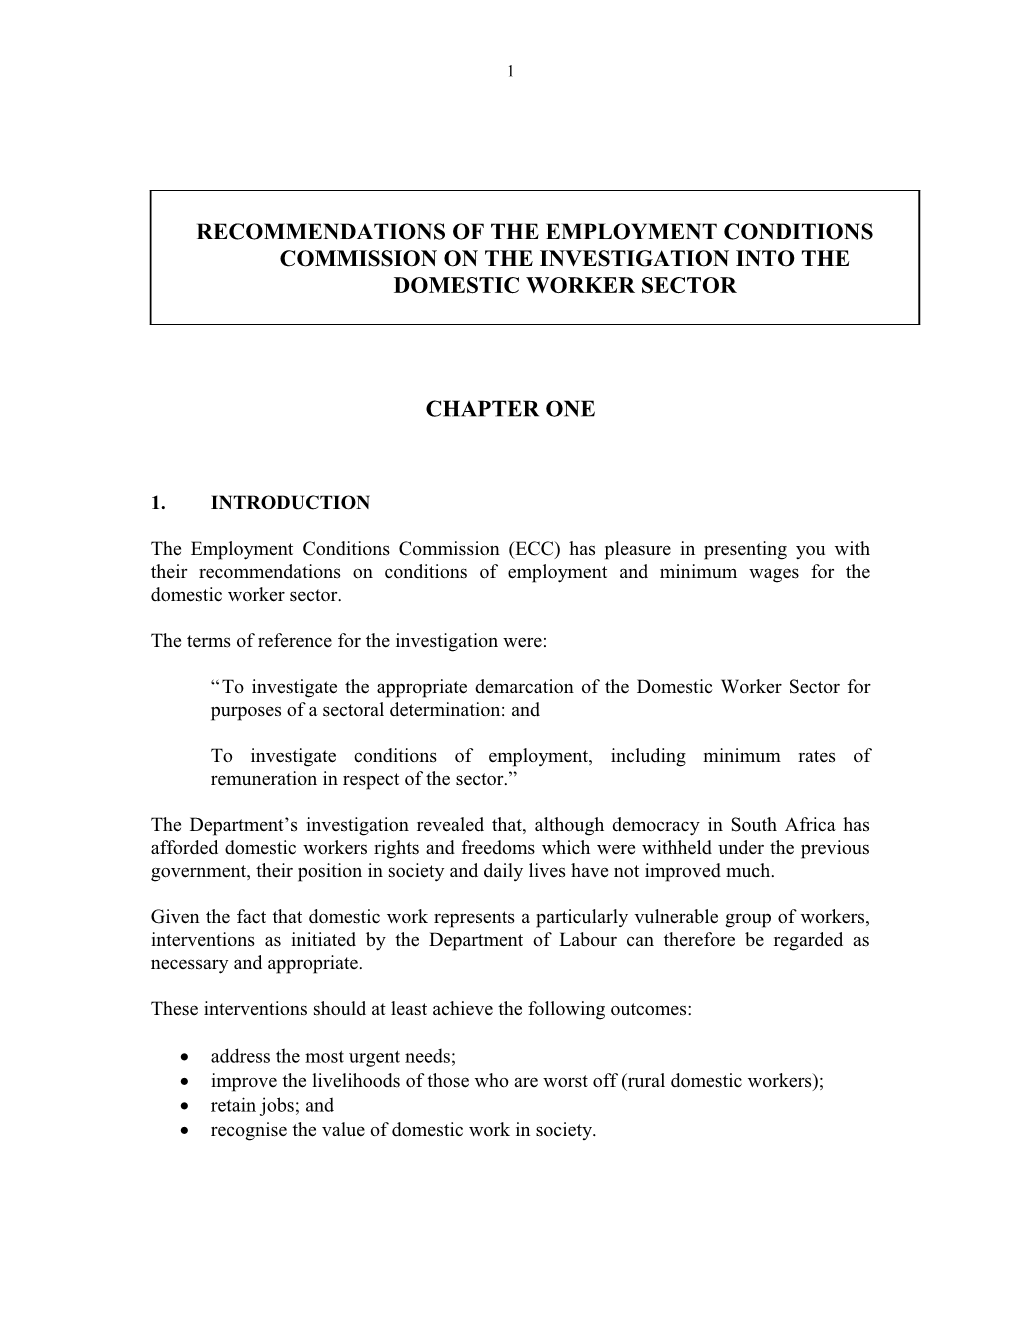 Recommendations of the Employment Conditions Commission on the Investigation Into the Domestic s1